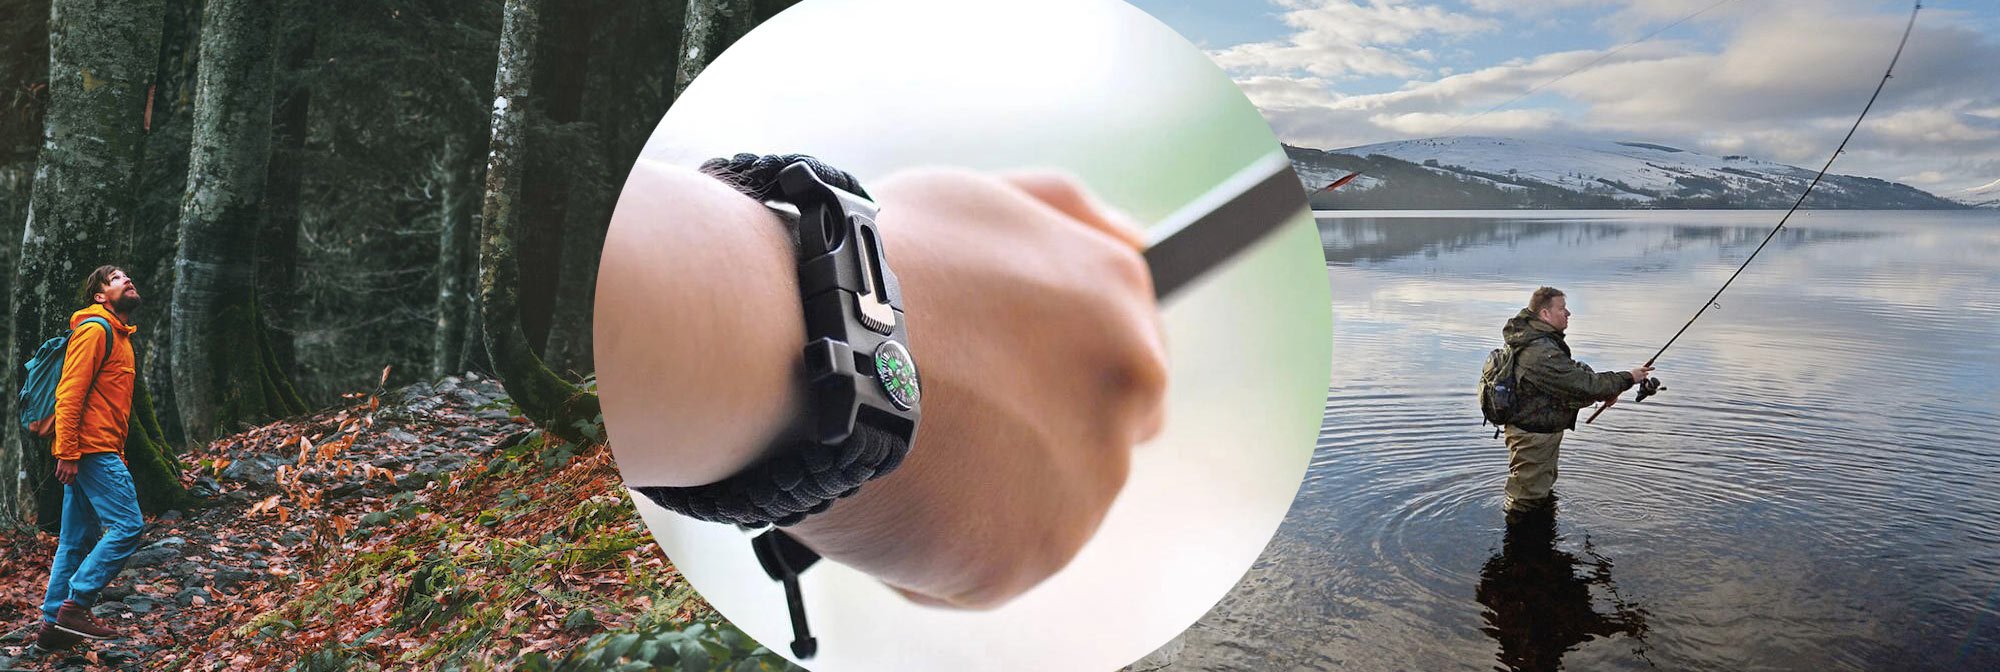 Five Ways a Survival Bracelet Could Get You Out of Trouble